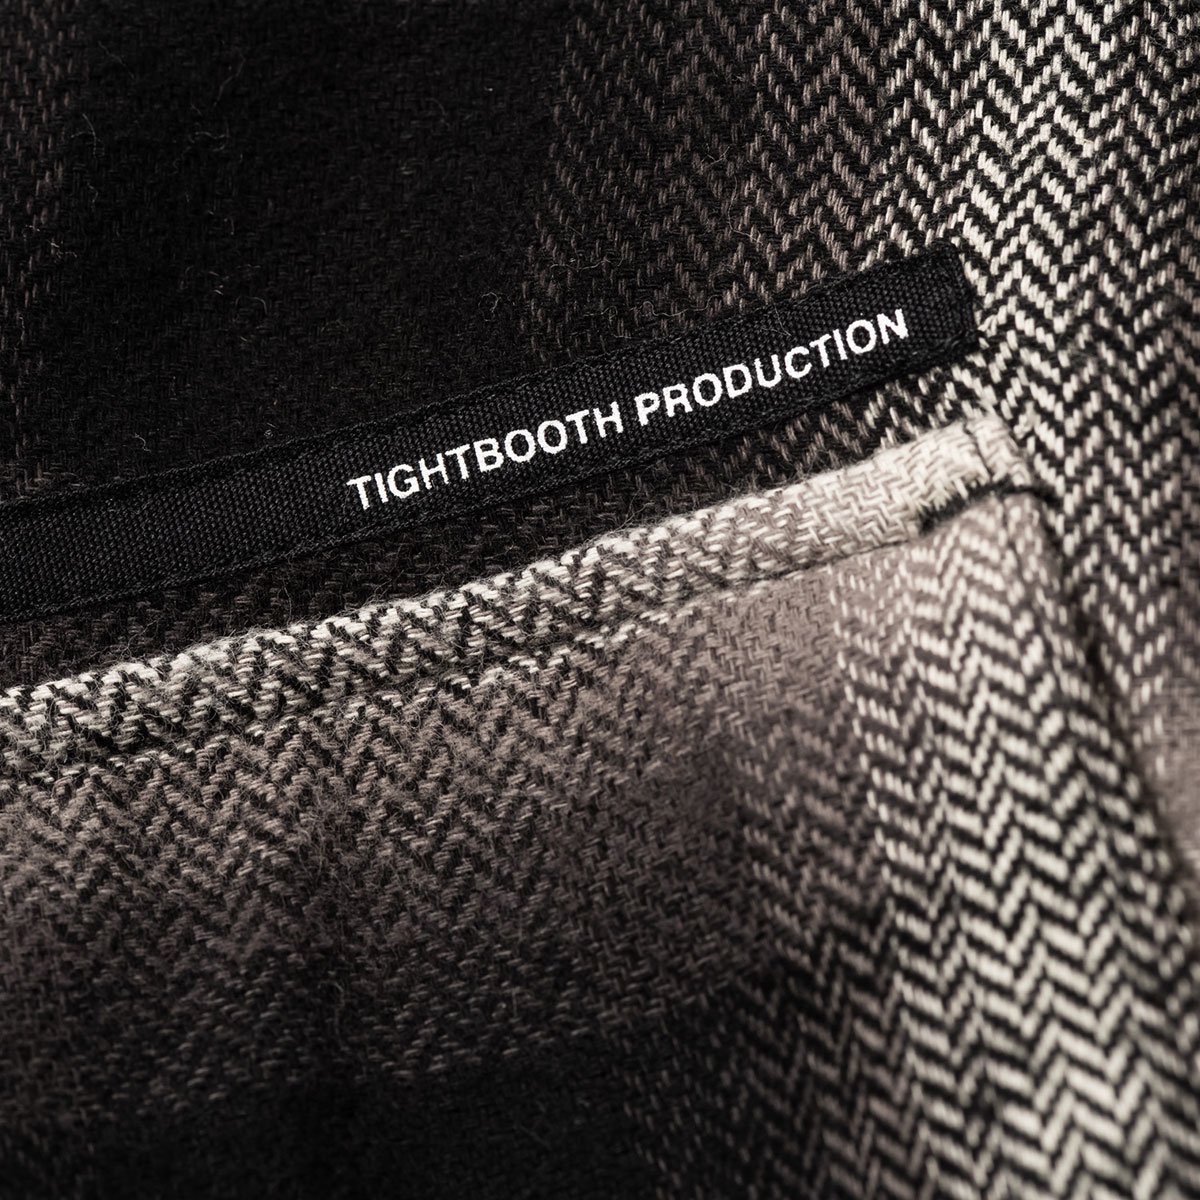 OMBRE HERRINGBONE JKT - TIGHTBOOTH PRODUCTION